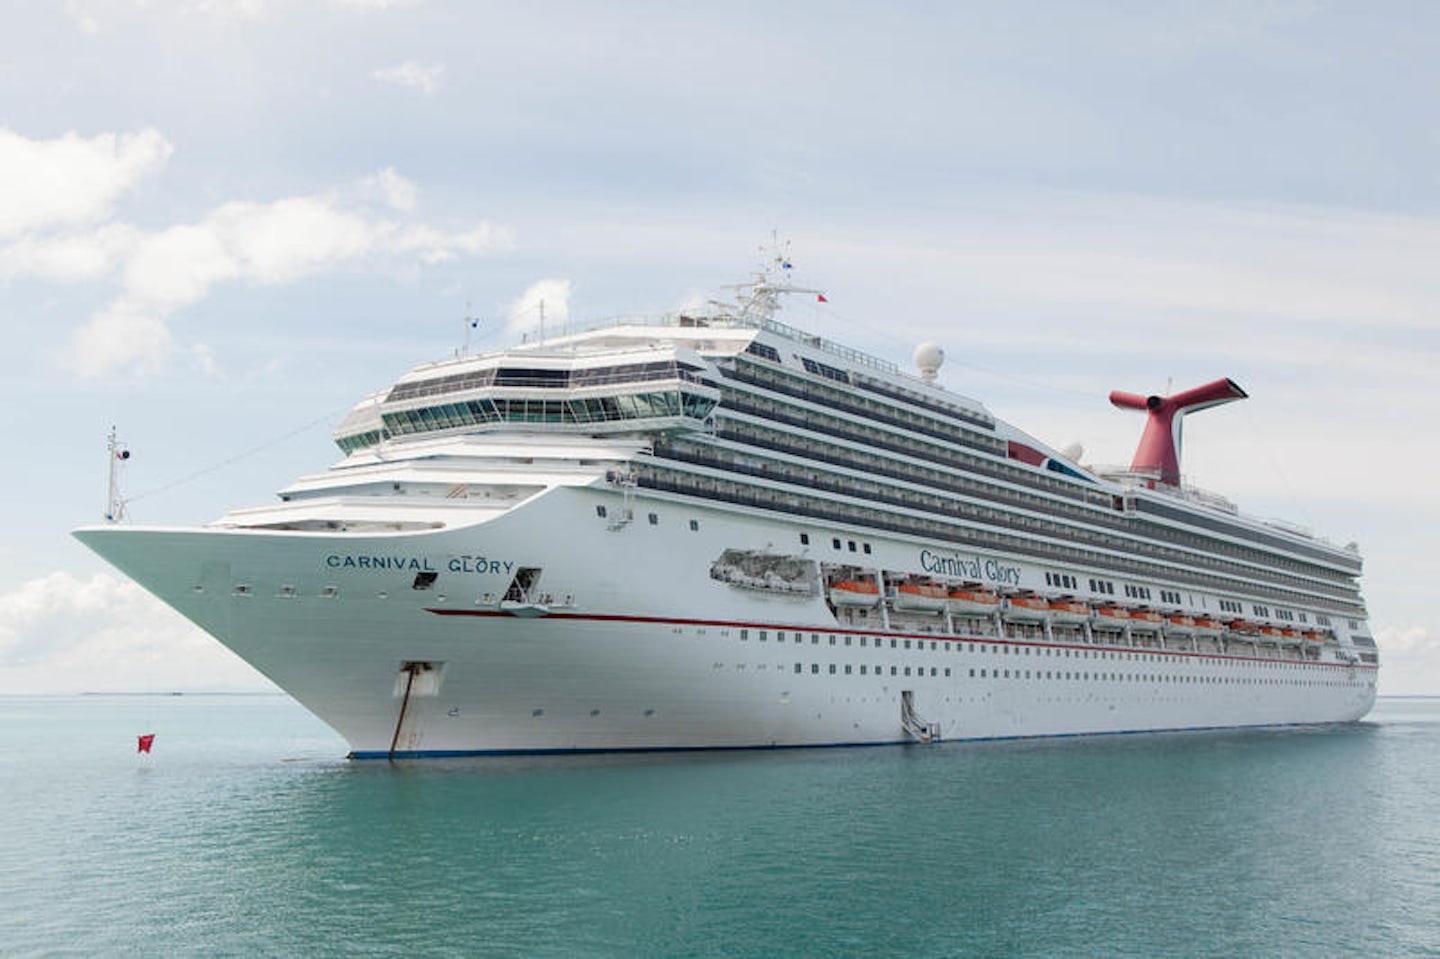 Ship Exterior on Carnival Glory